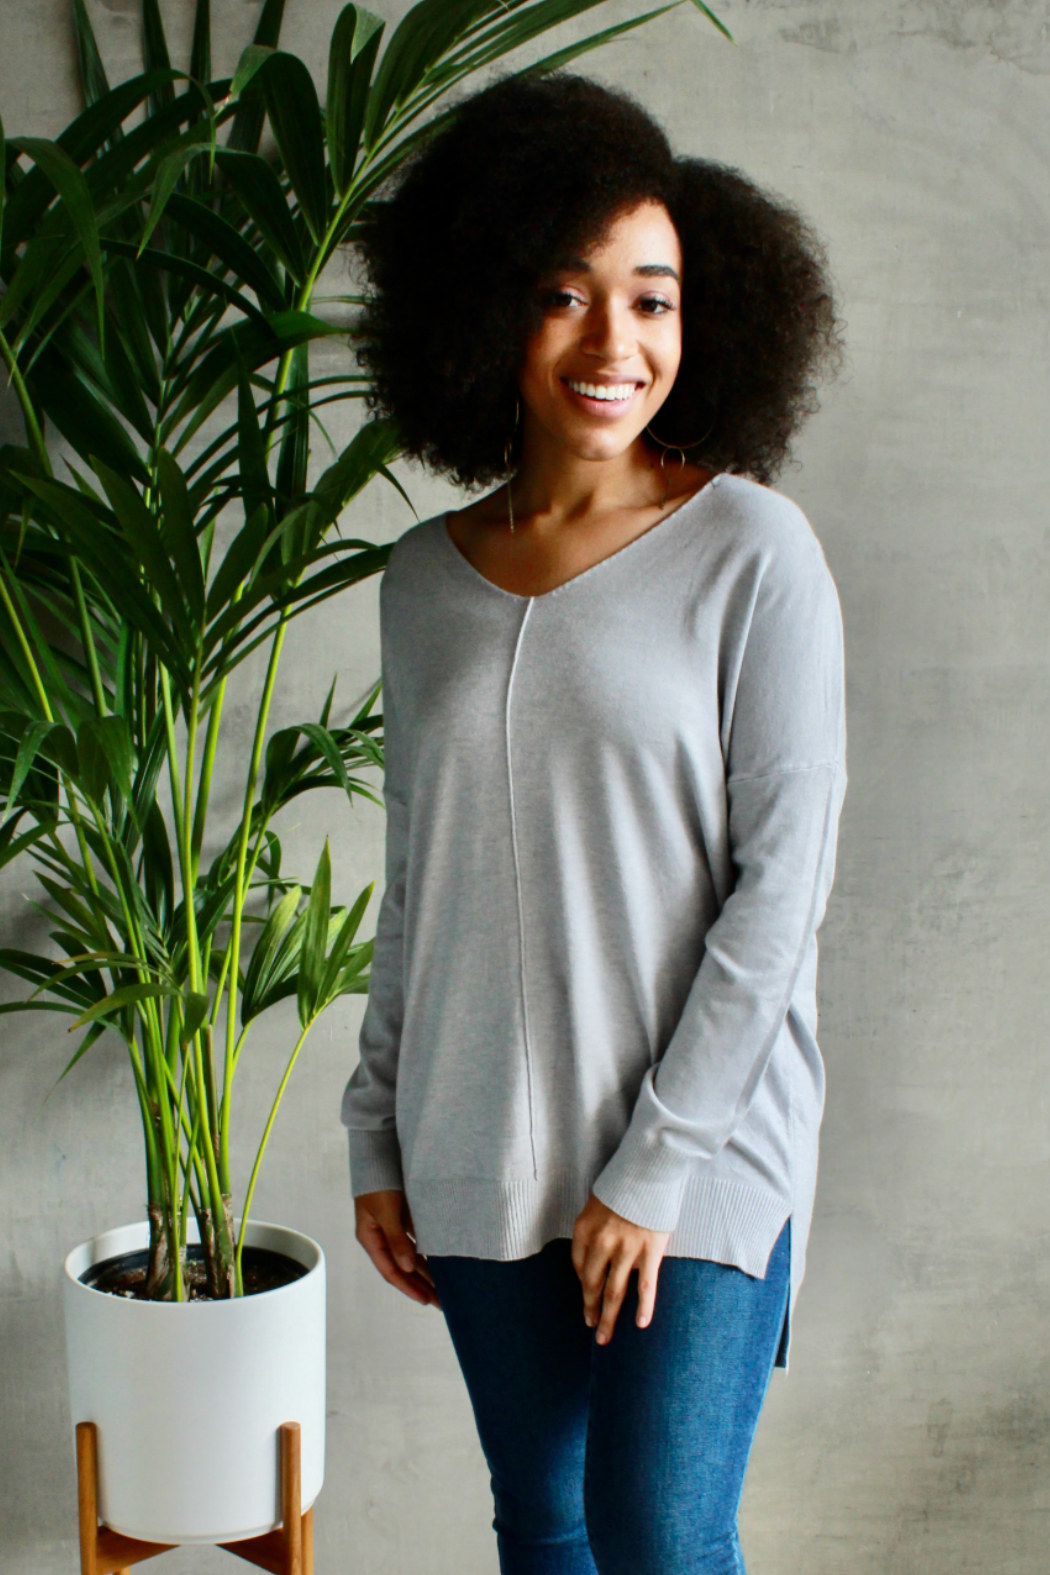 Model wearing the v-neck grey sweater with a seam down the front middle